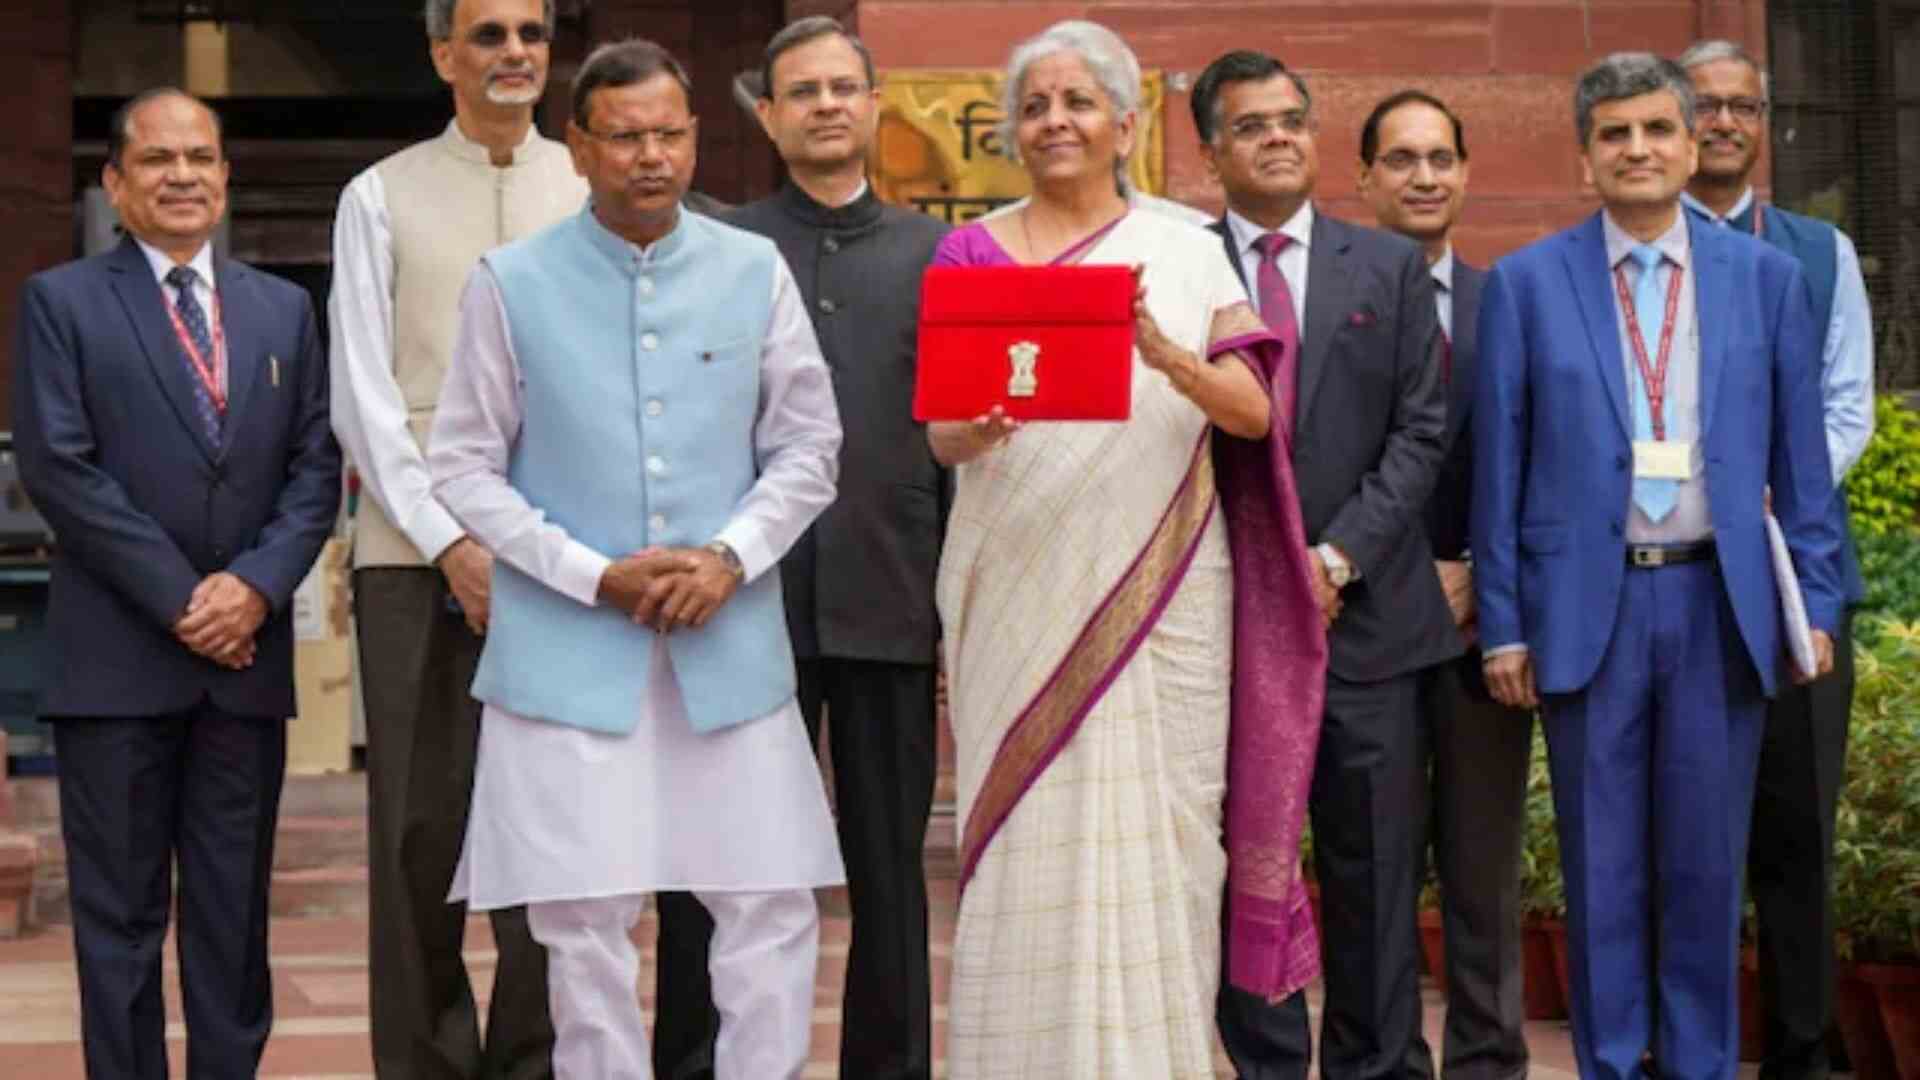 Nirmala Sitharaman’s Budget Speech: Will She Reveal the Roadmap for Vision 2047?